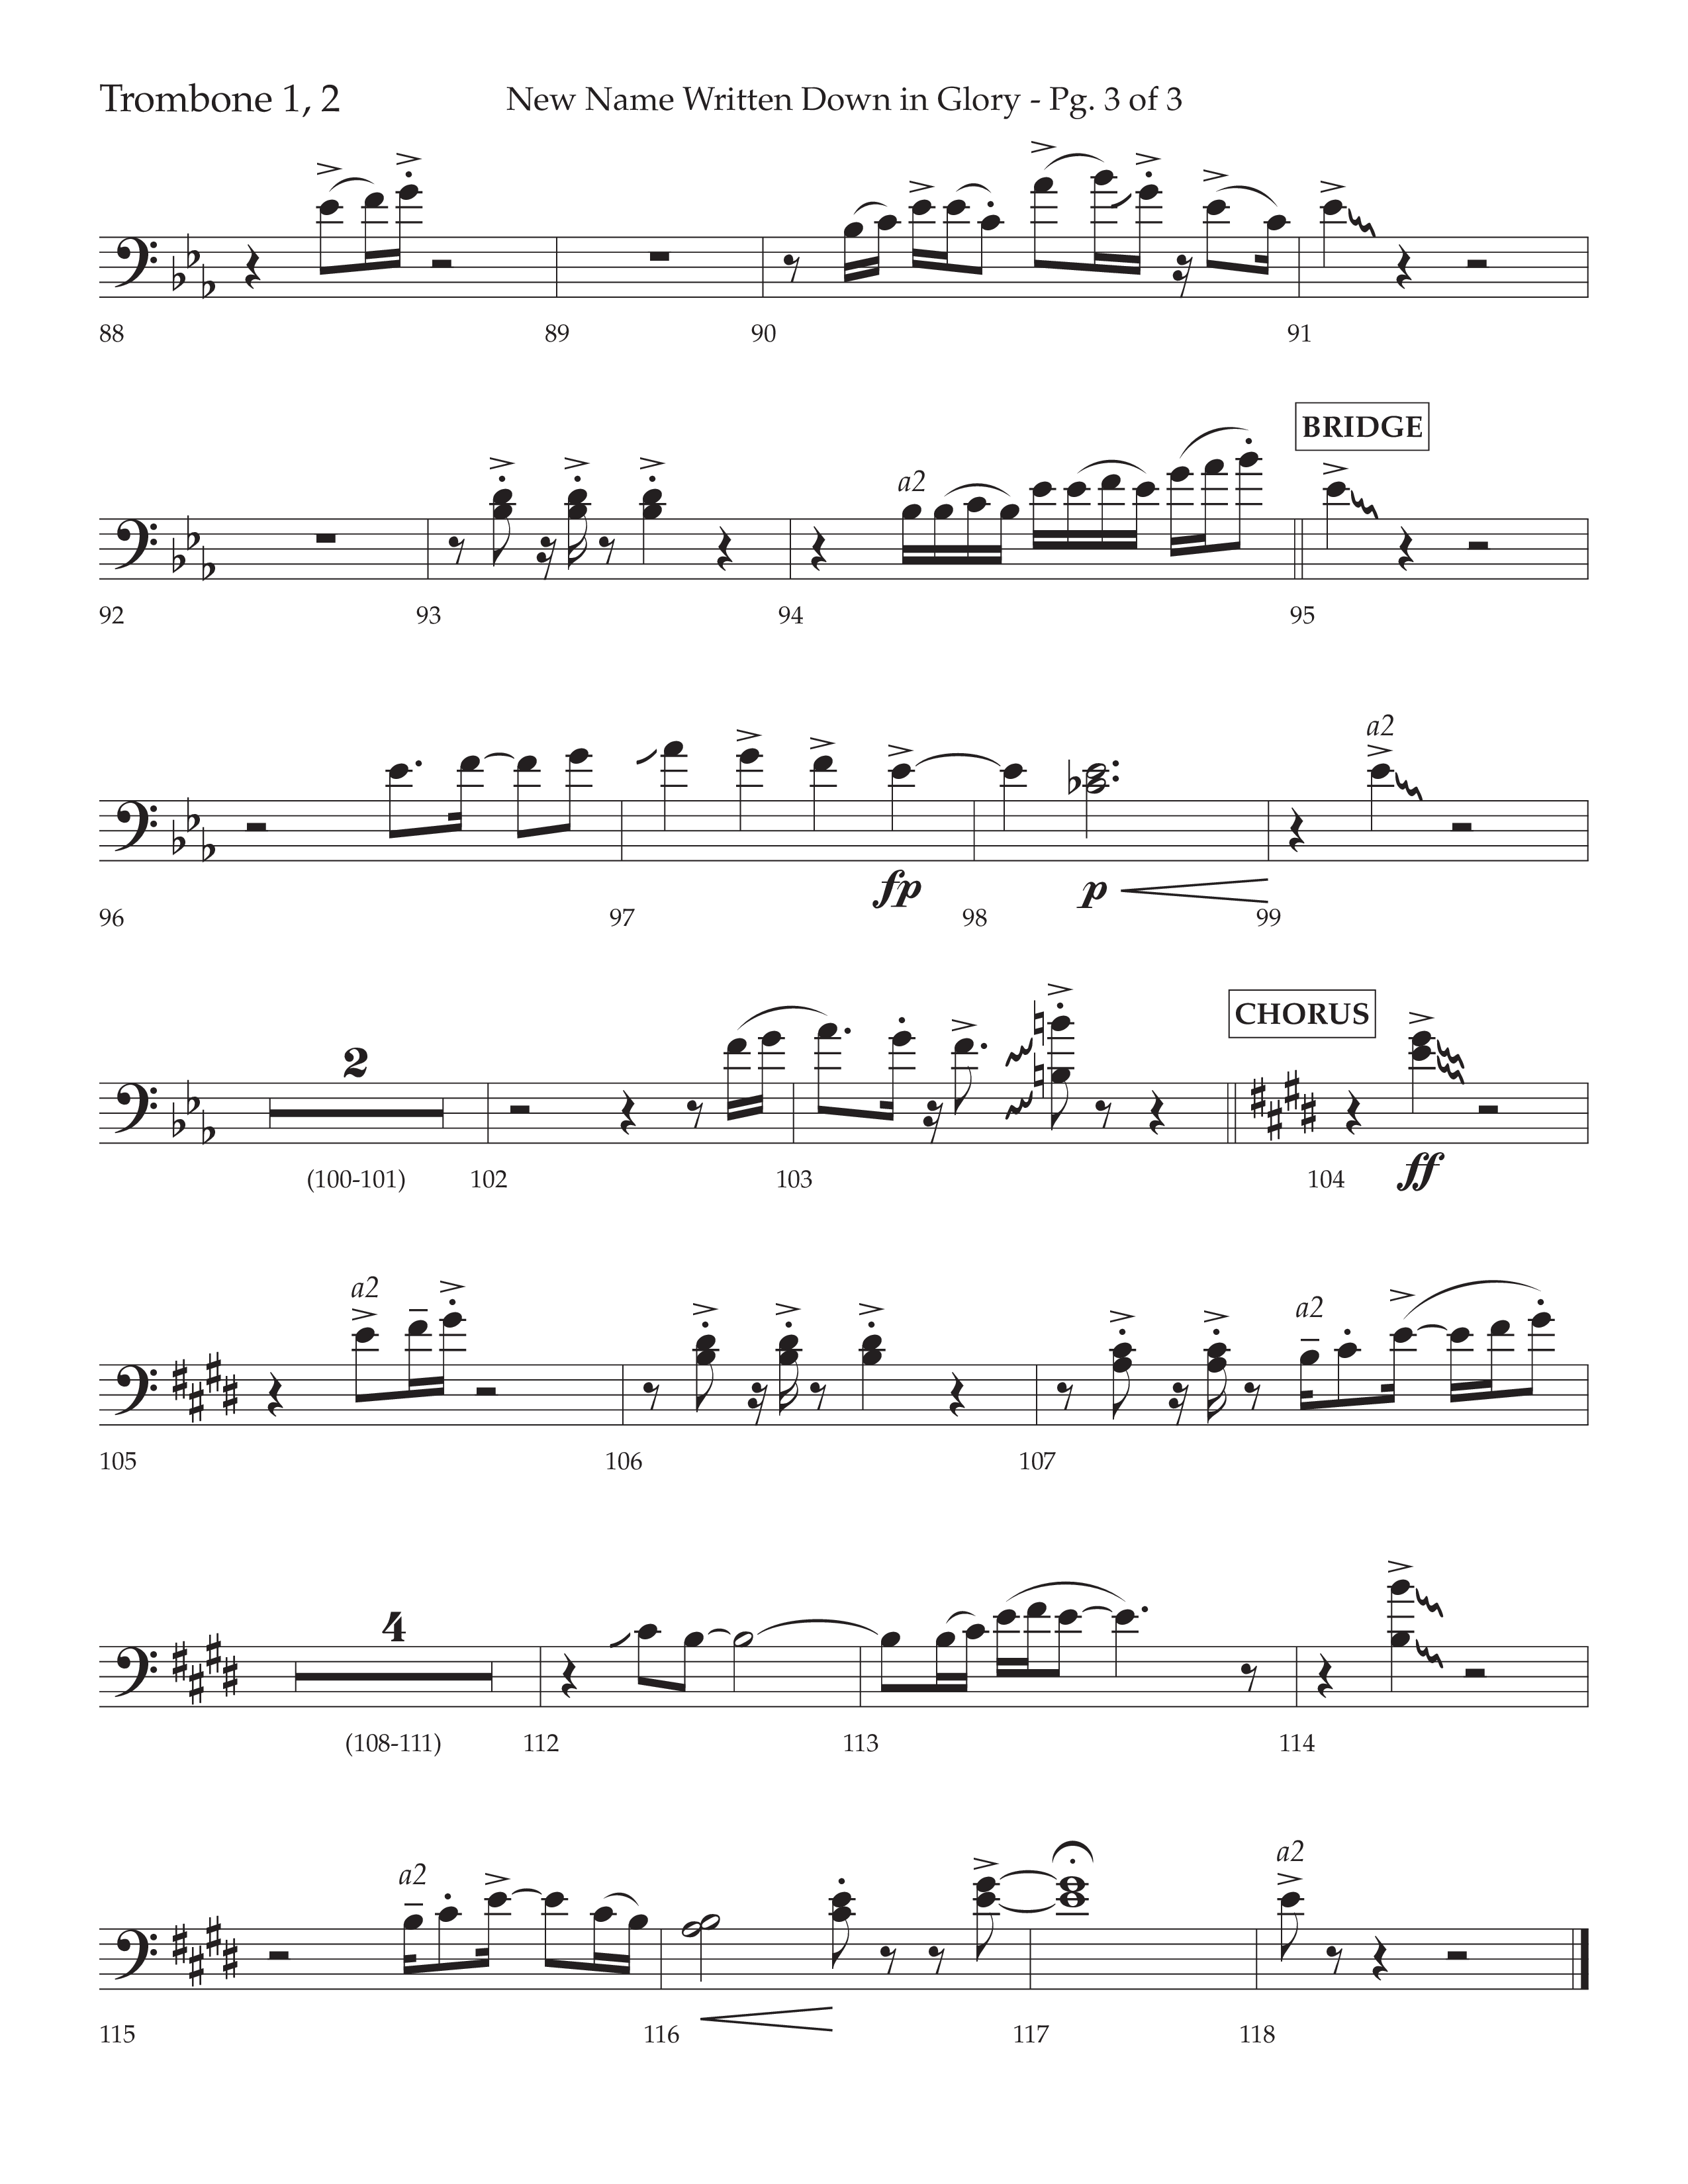 New Name Written Down In Glory (Choral Anthem SATB) Trombone 1/2 (Lifeway Choral / Arr. David Wise / Orch. Bradley Knight)